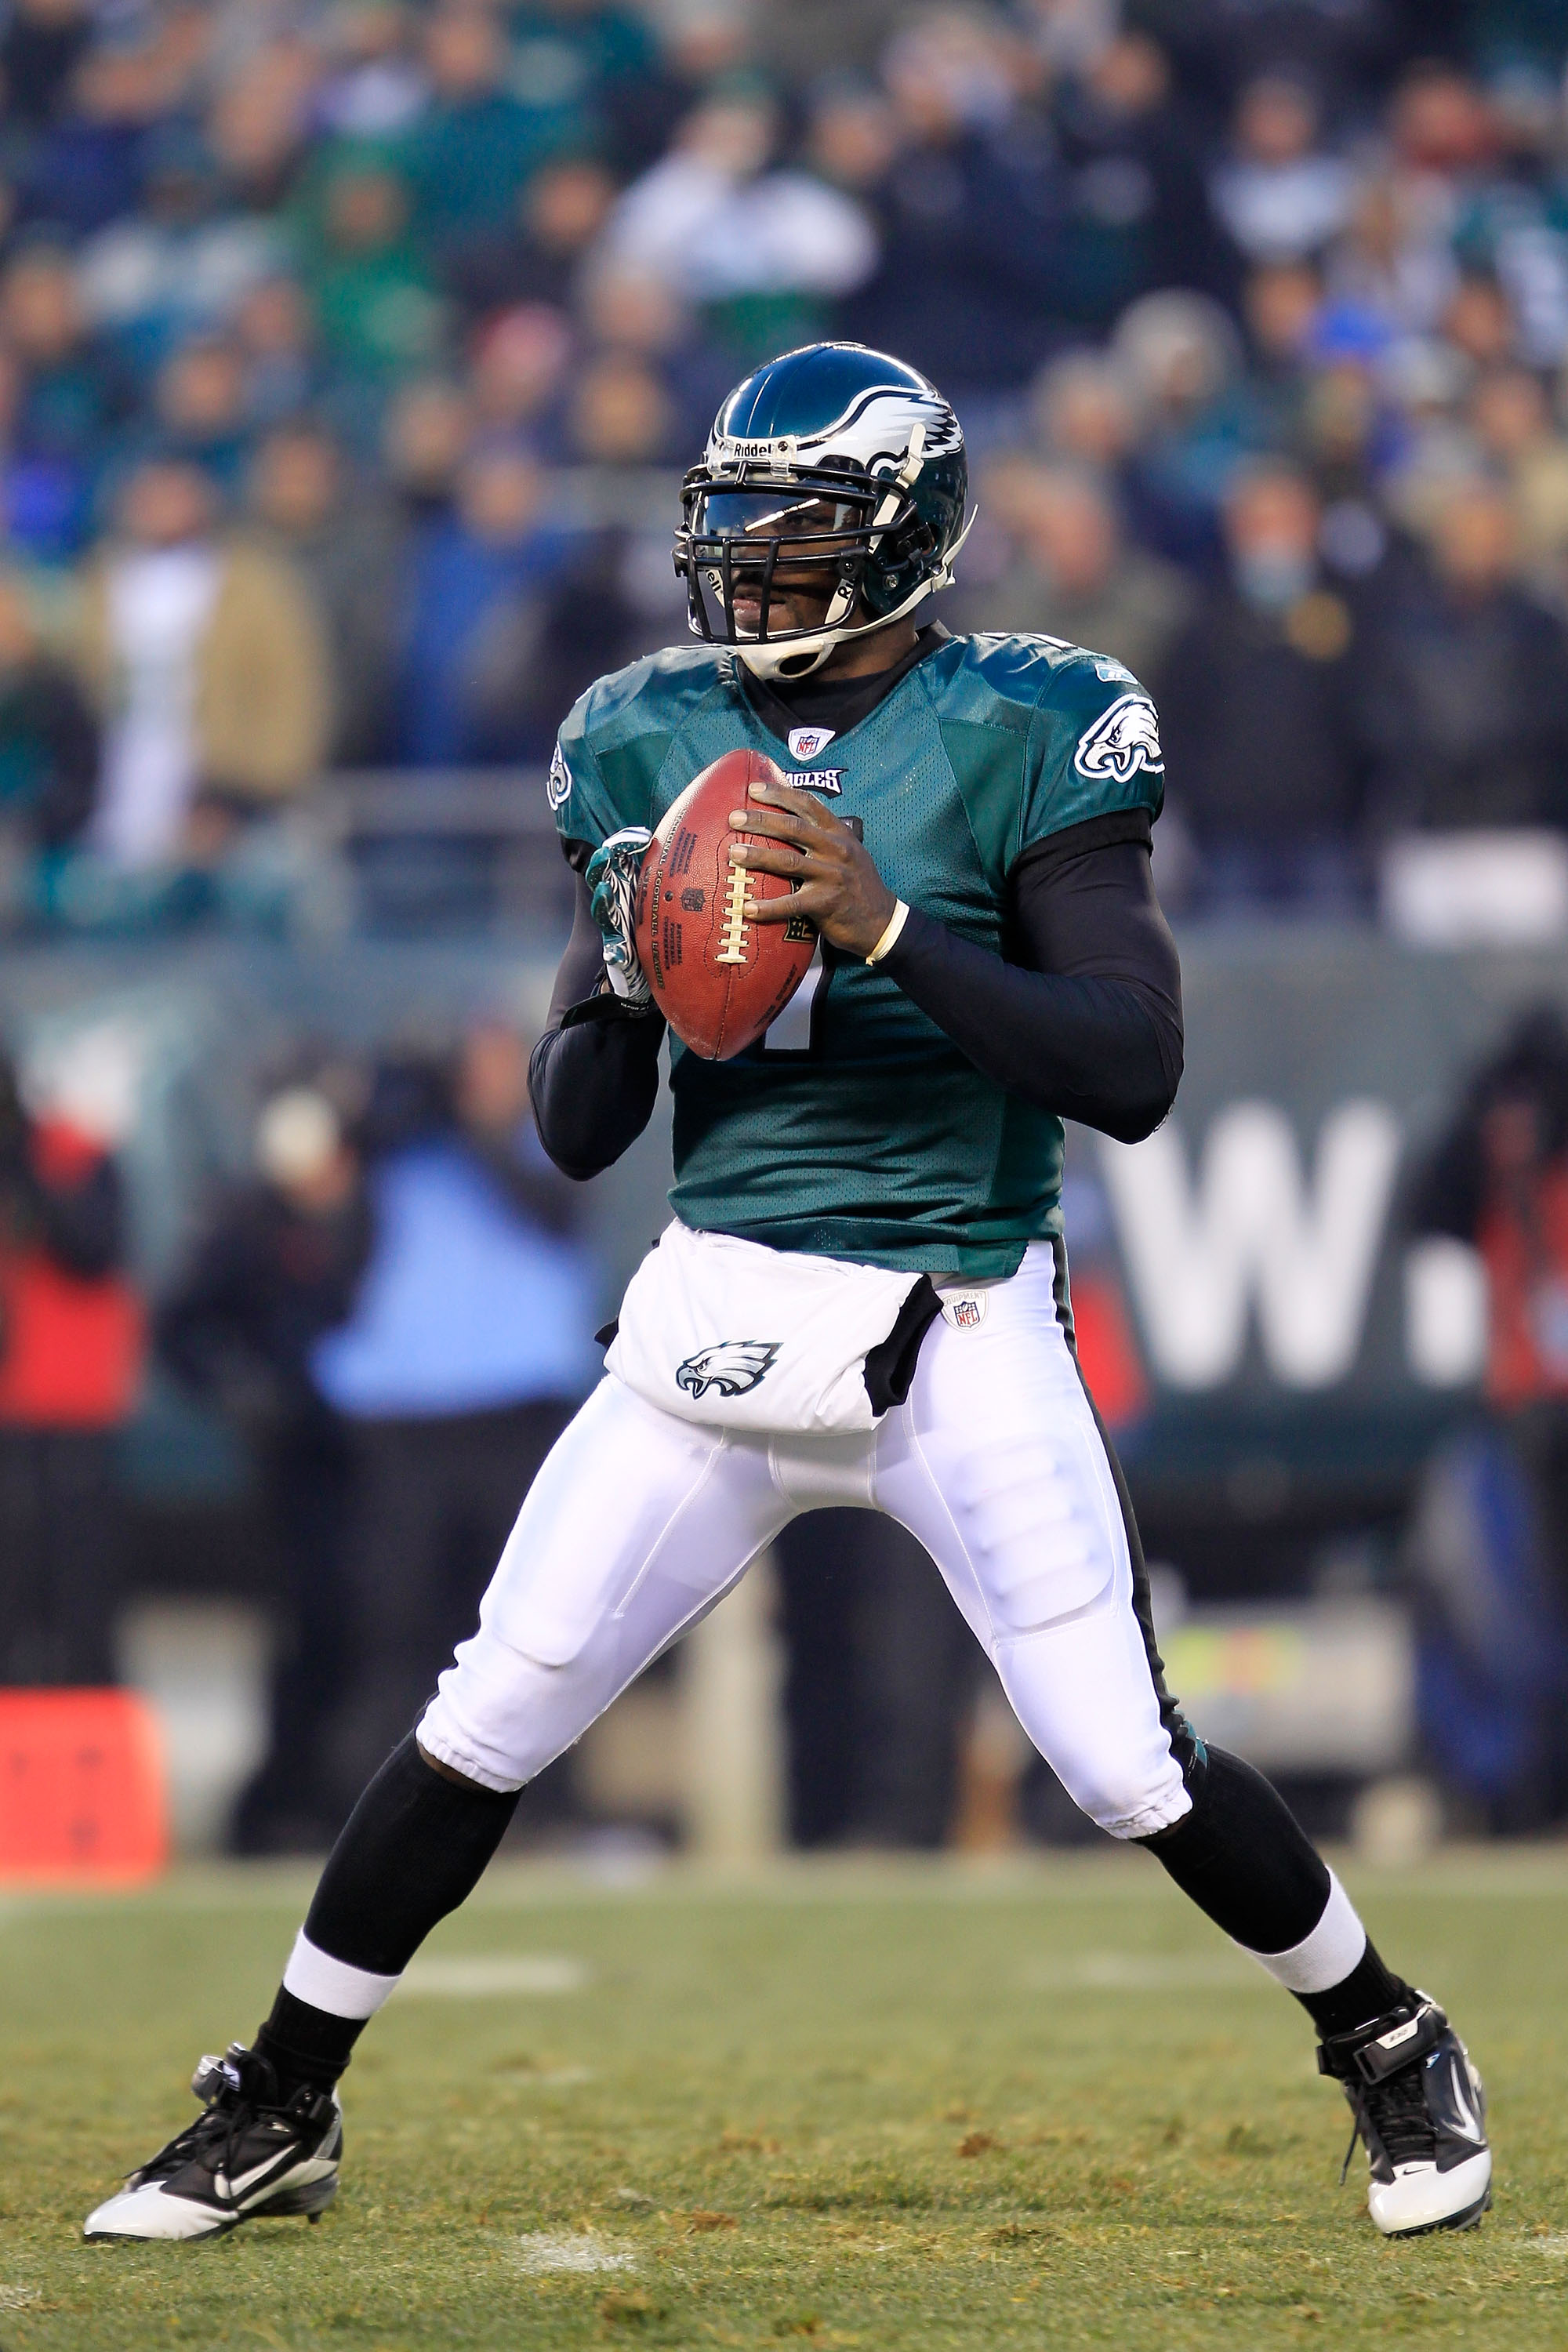 PHILADELPHIA, PA - JANUARY 09:  Michael Vick #7 of the Philadelphia Eagles drops back against the Green Bay Packers during the 2011 NFC wild card playoff game at Lincoln Financial Field on January 9, 2011 in Philadelphia, Pennsylvania.  (Photo by Chris Tr